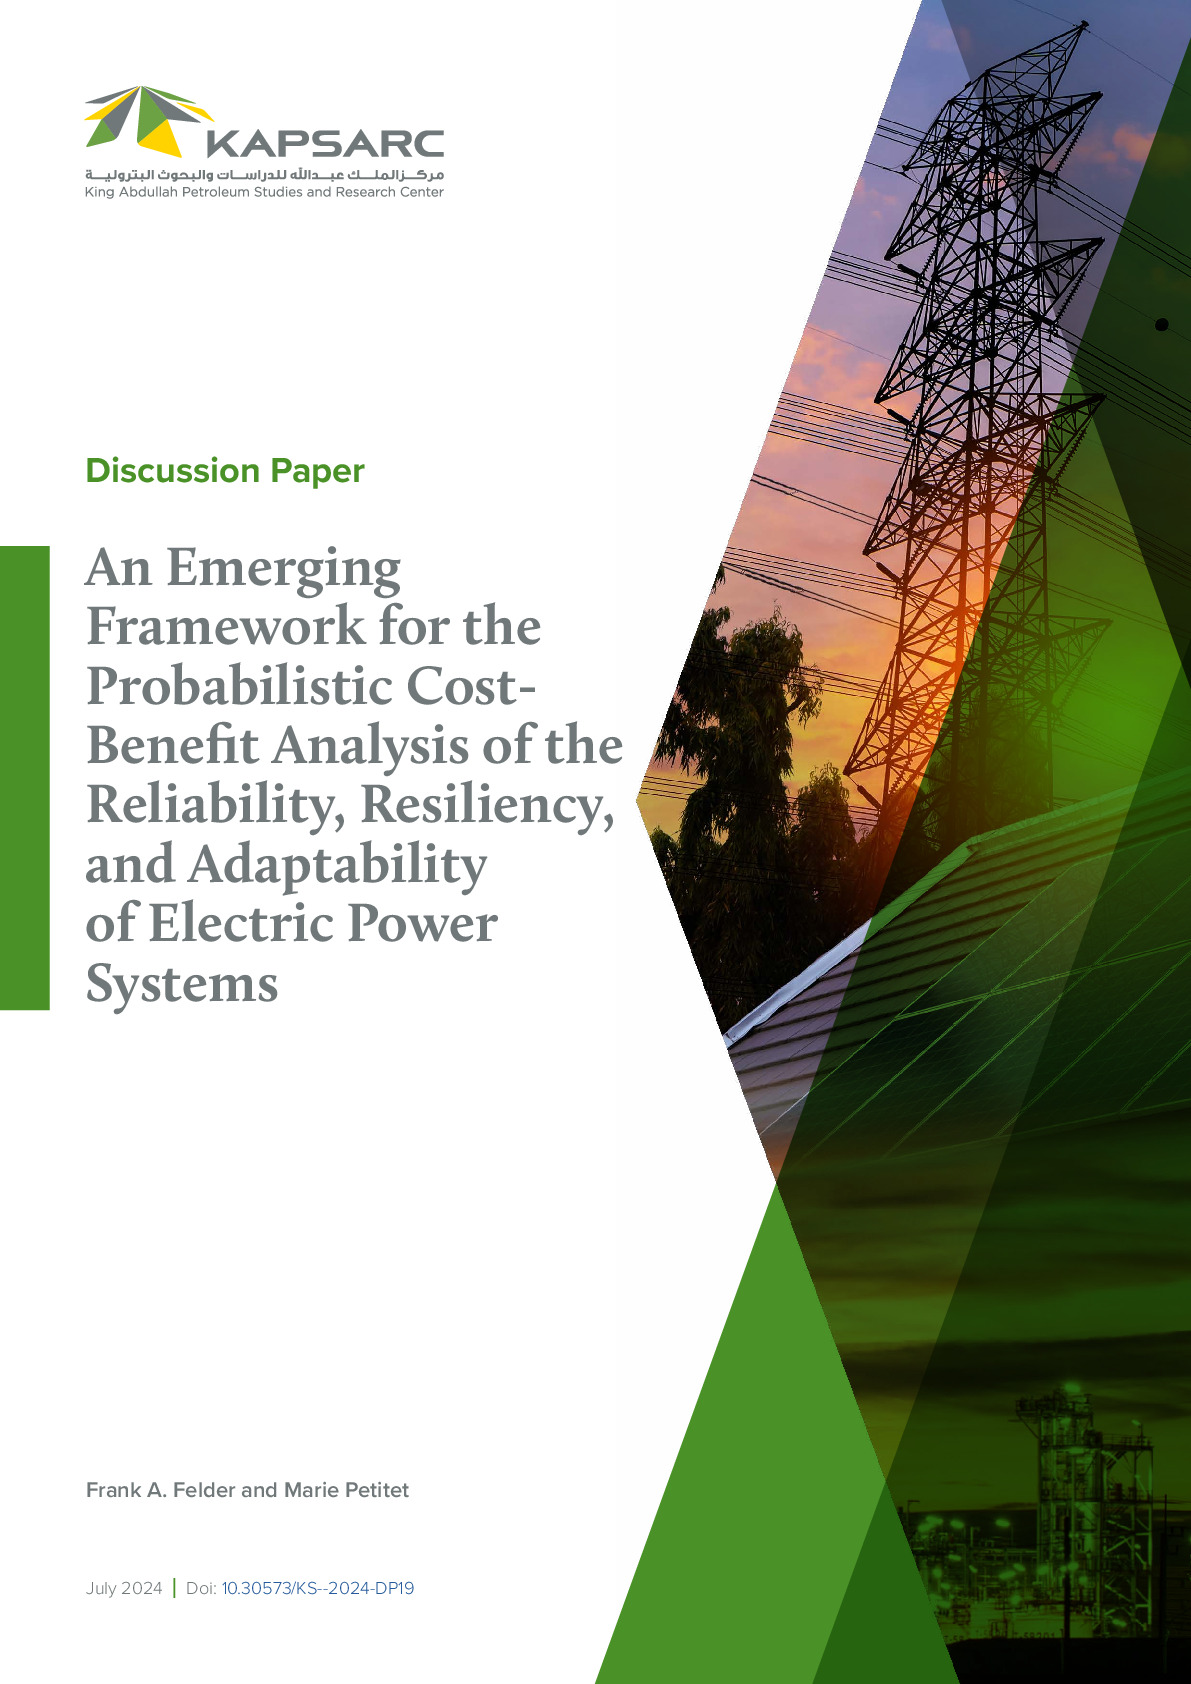 An Emerging Framework for the Probabilistic Cost- Benefit Analysis of the Reliability, Resiliency, and Adaptability of Electric Power Systems